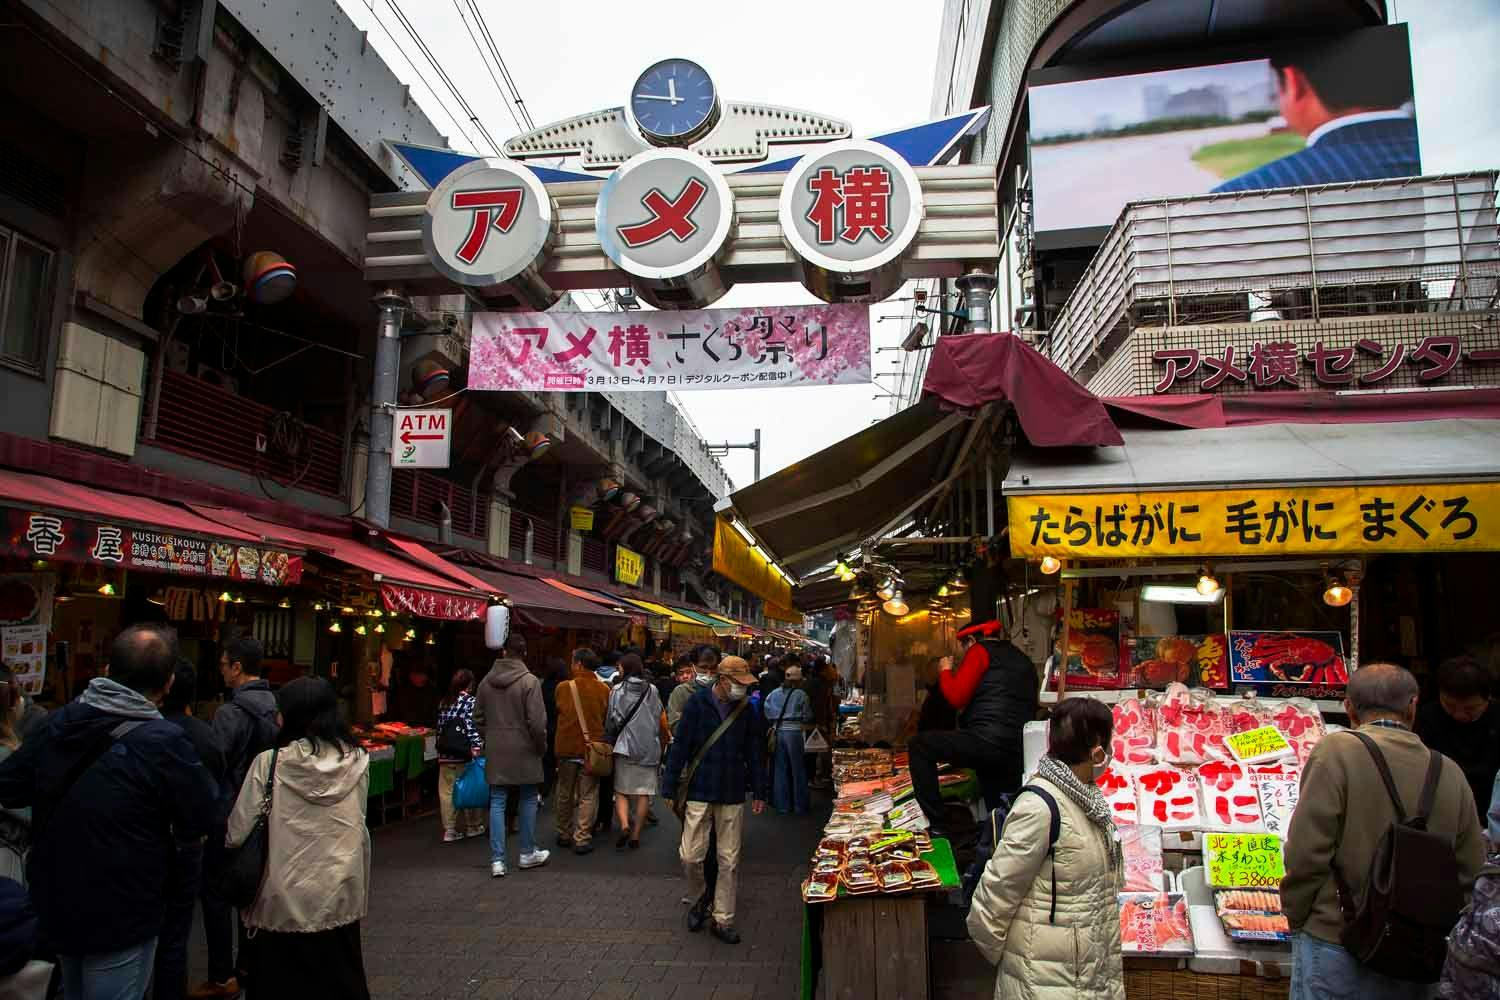 Ameyoko, a Tokyo market place in Ueno that specializes in serving foreign customers. Photo source: James Saunders-Wyndham